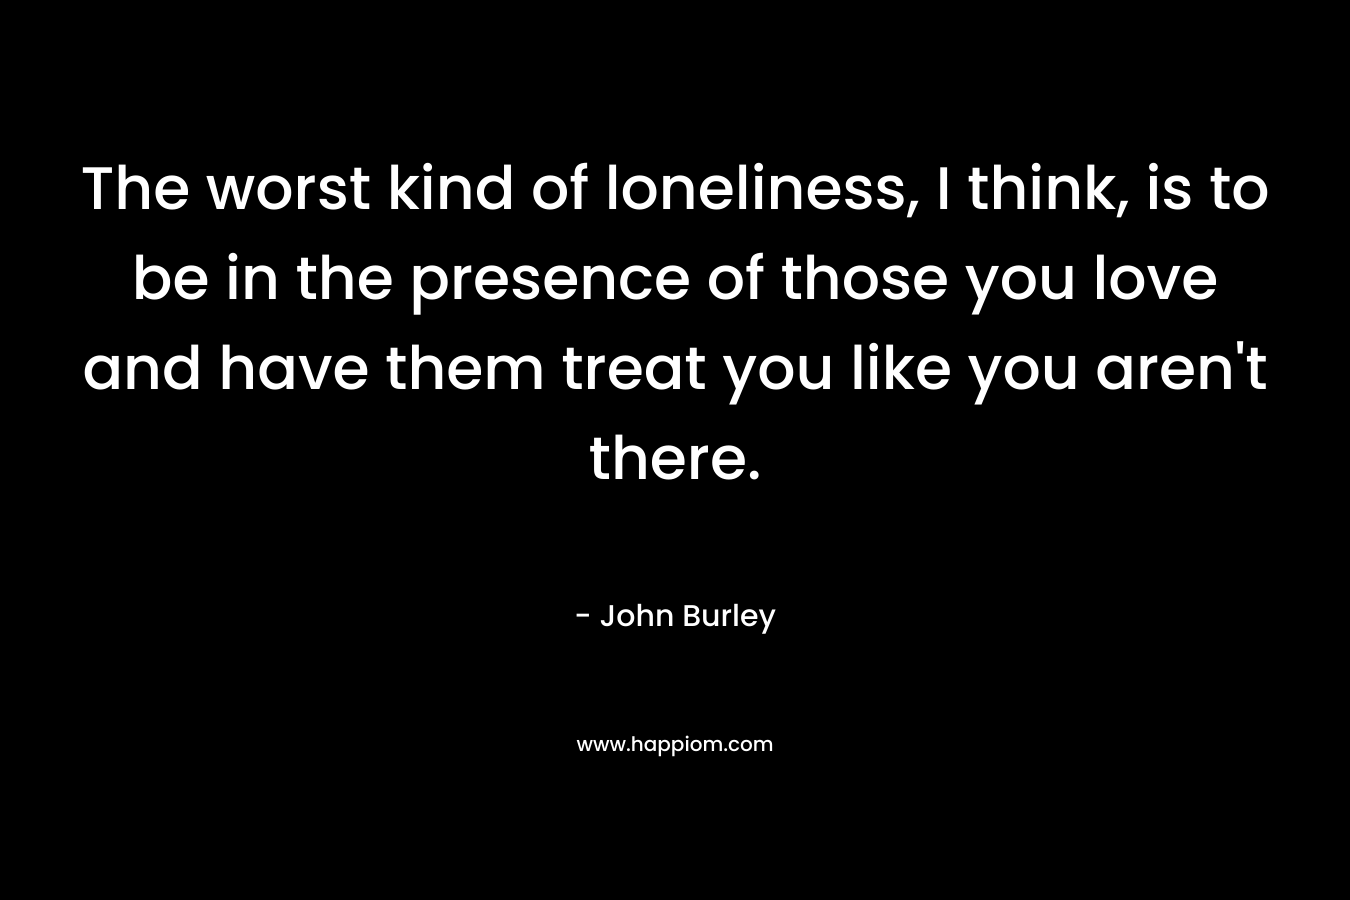 The worst kind of loneliness, I think, is to be in the presence of those you love and have them treat you like you aren't there.